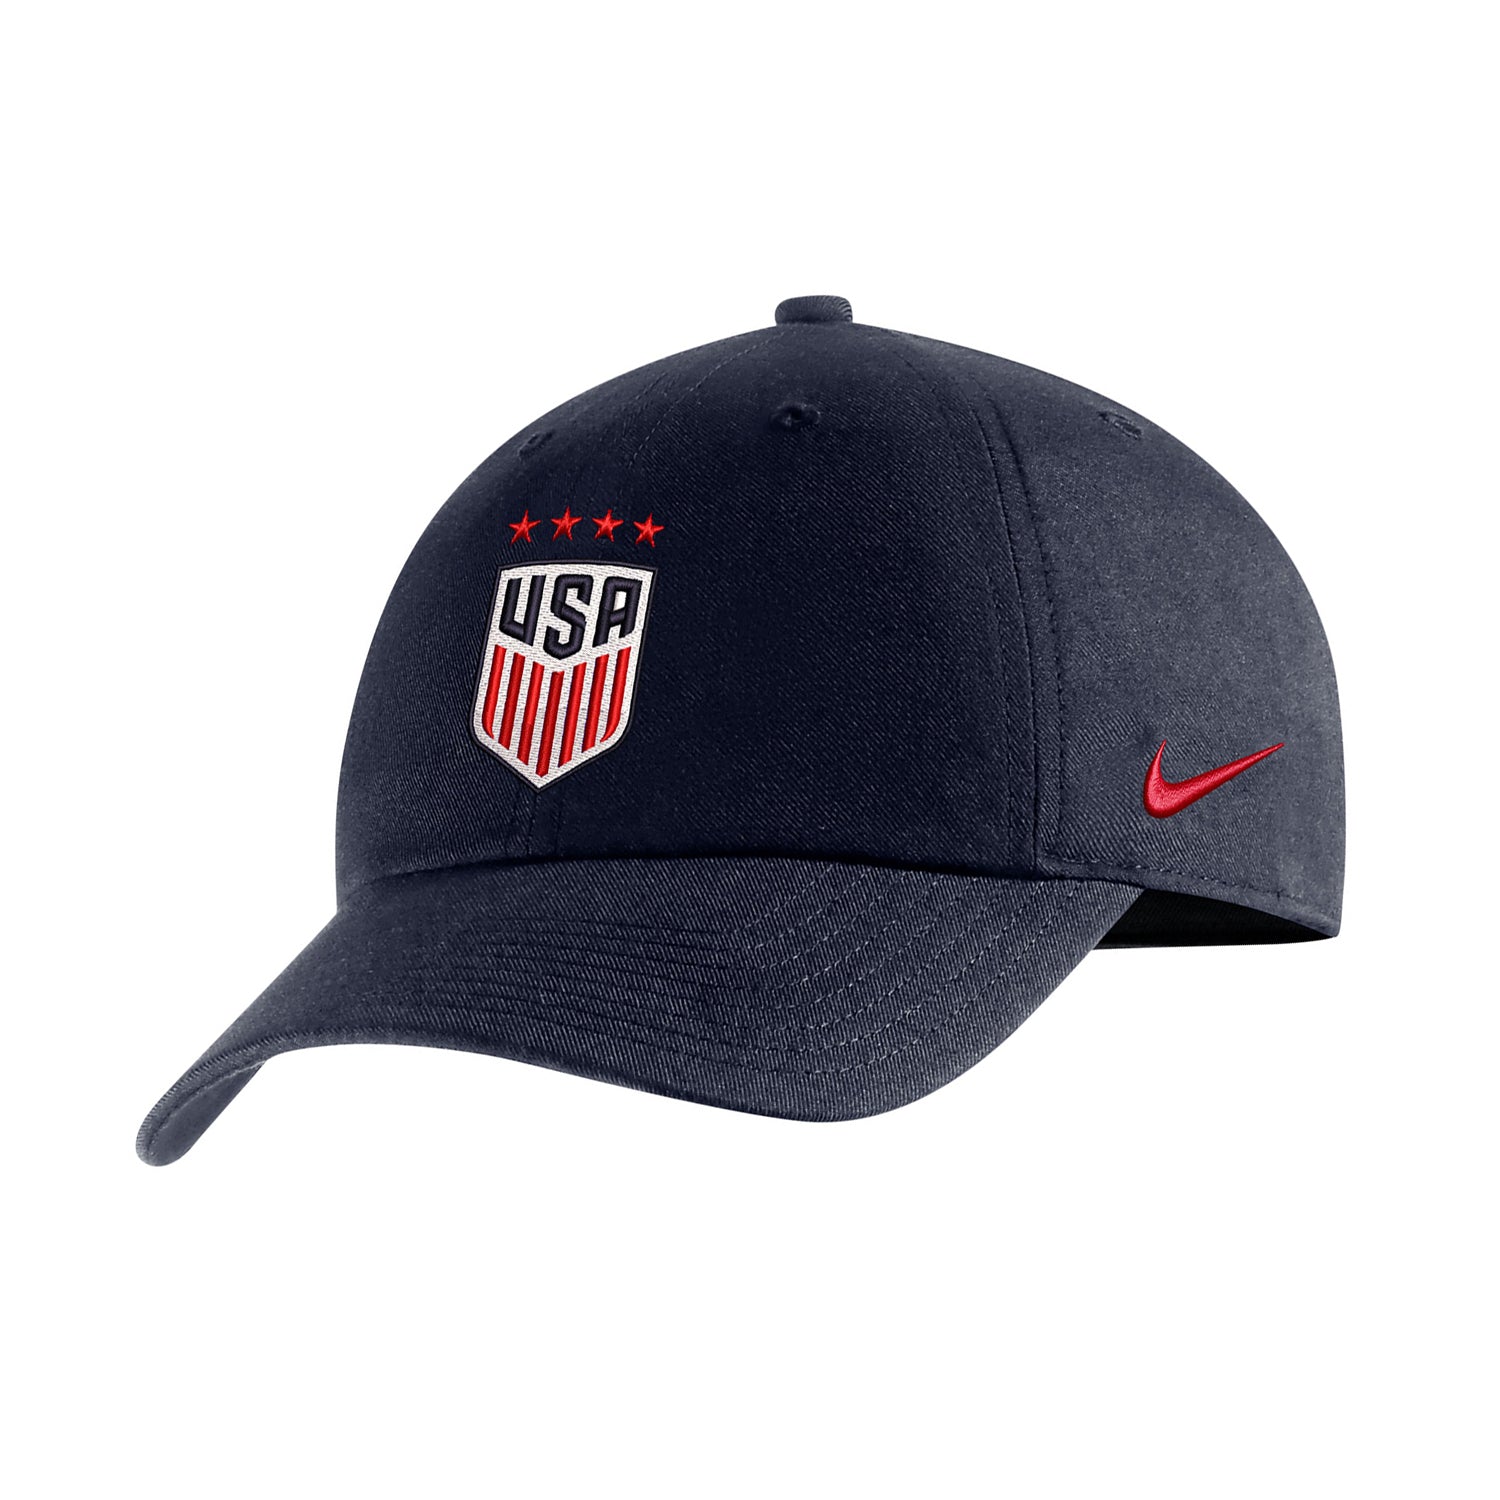 Men's Nike USWNT Campus Navy Hat - Official U.S. Soccer Store